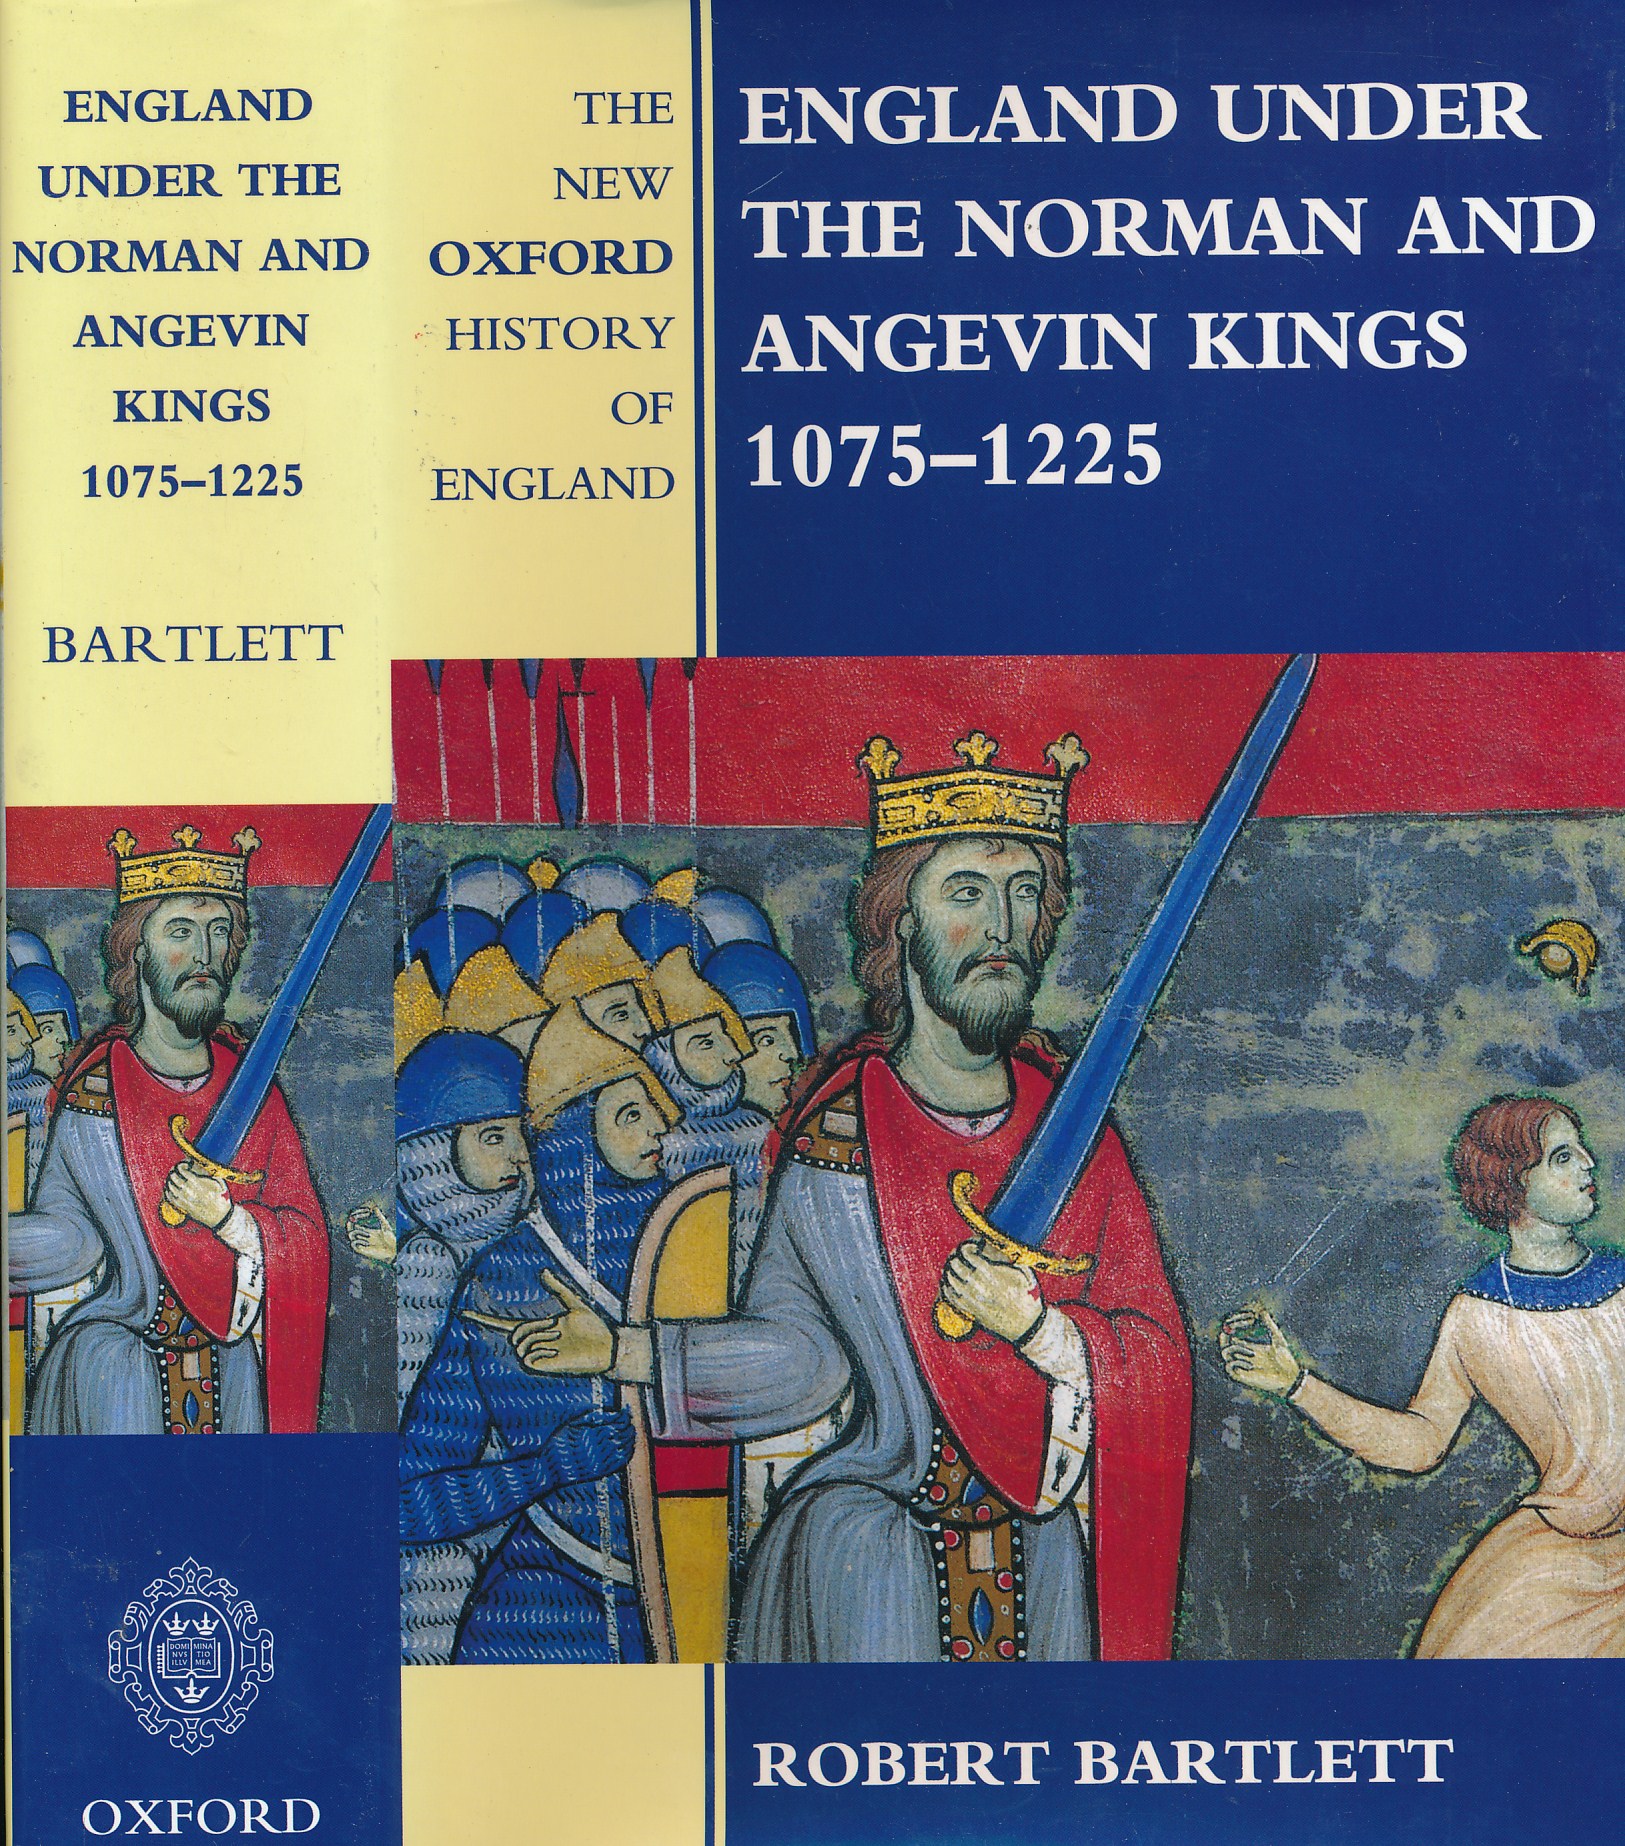 England Under the Norman and Angevin Kings 1075-1225